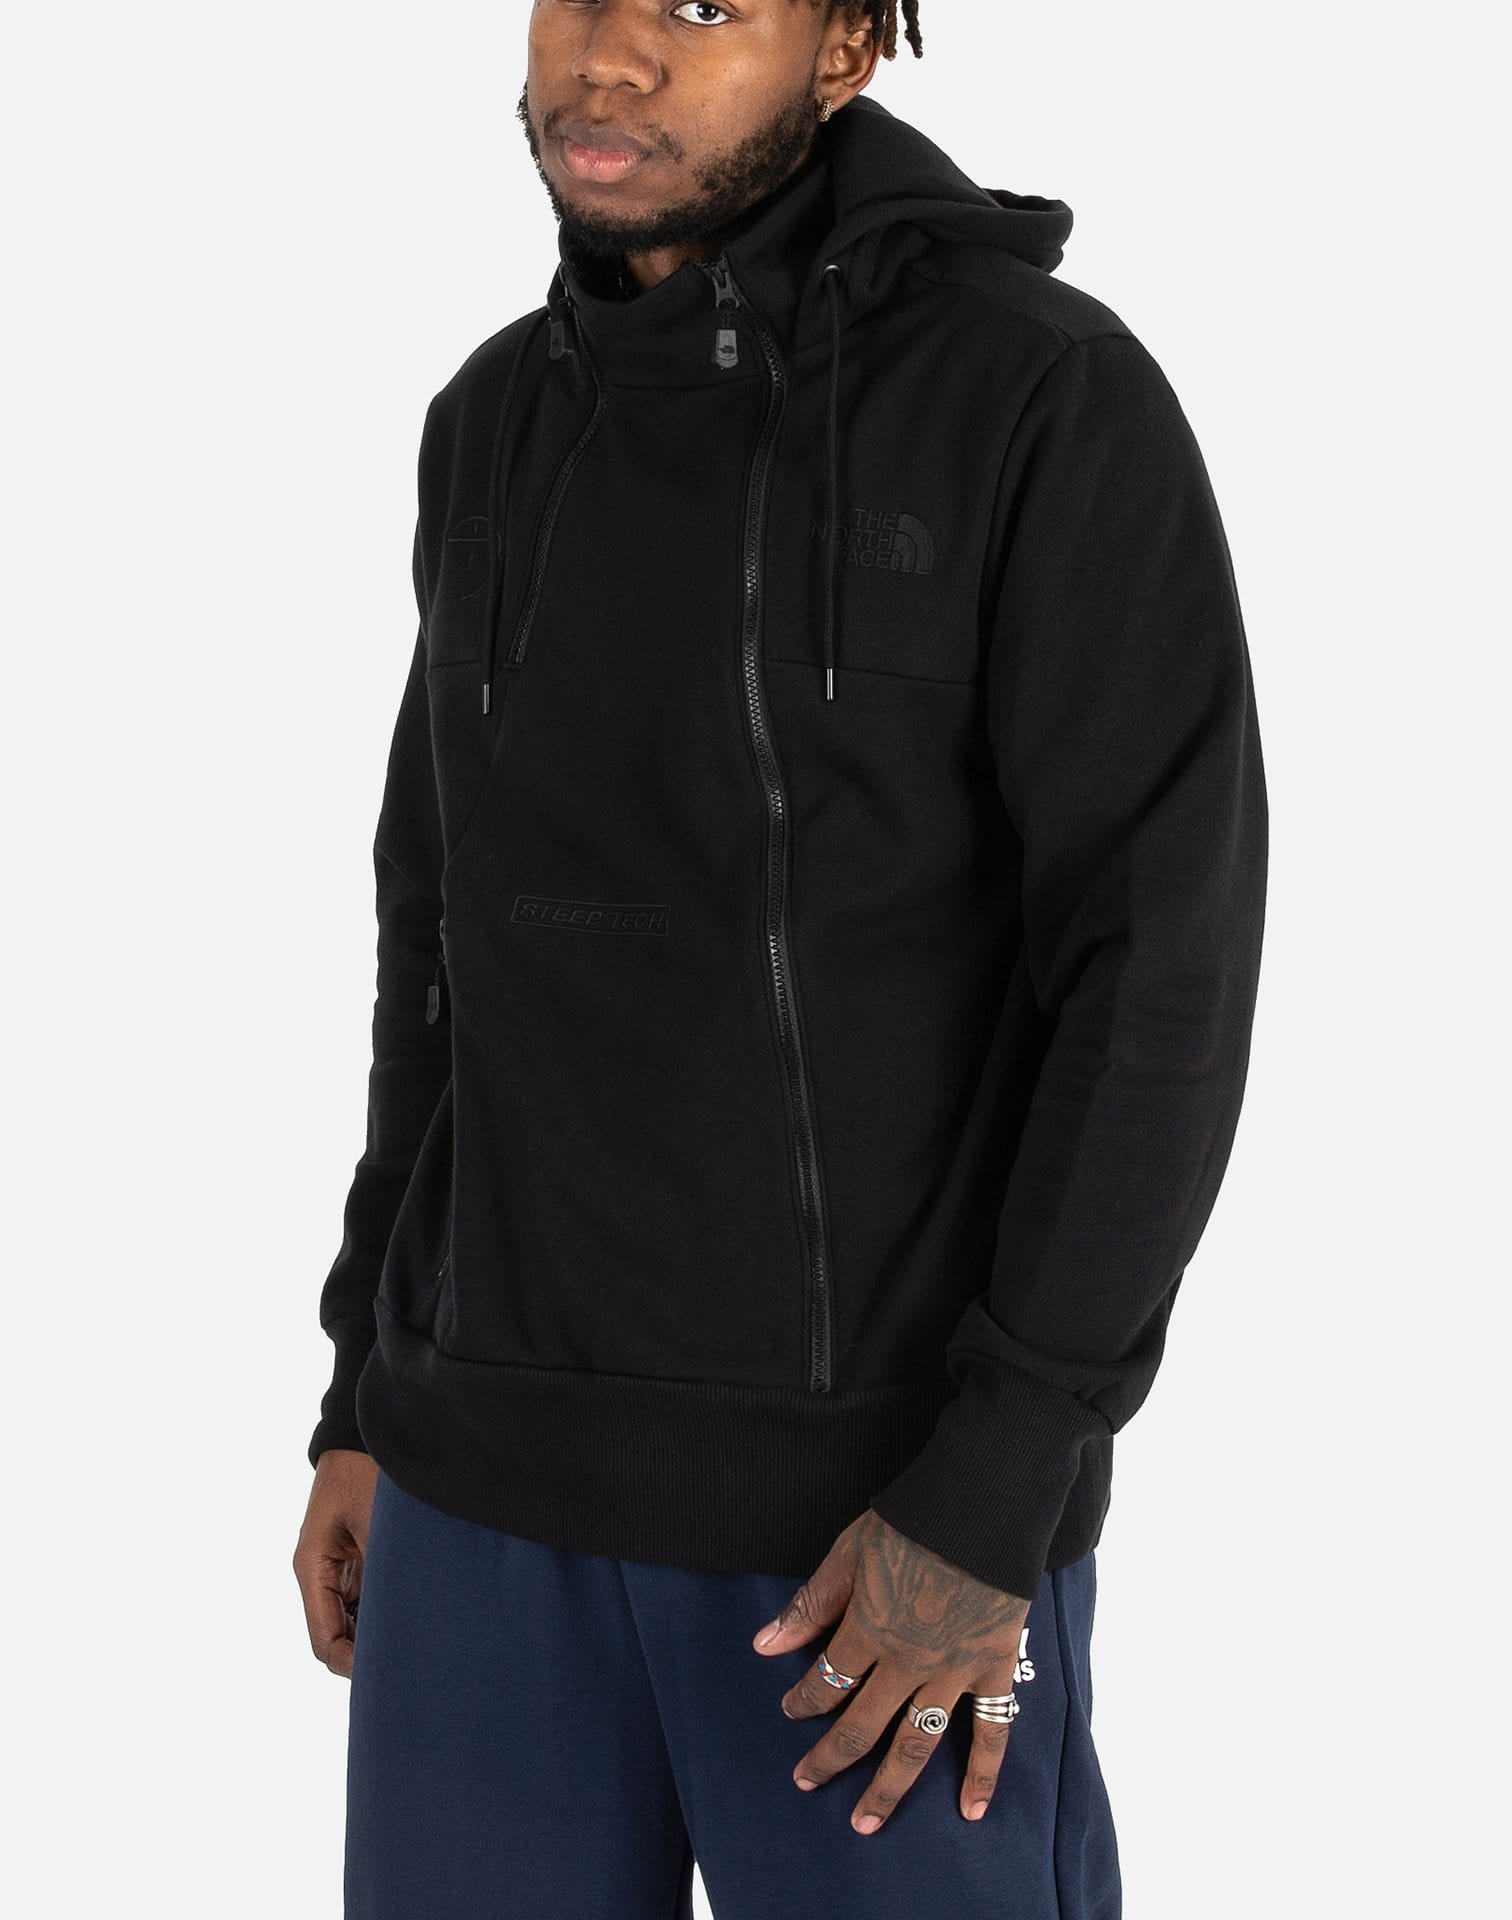 THE NORTH FACE STEEPTECH HOODIE - パーカー